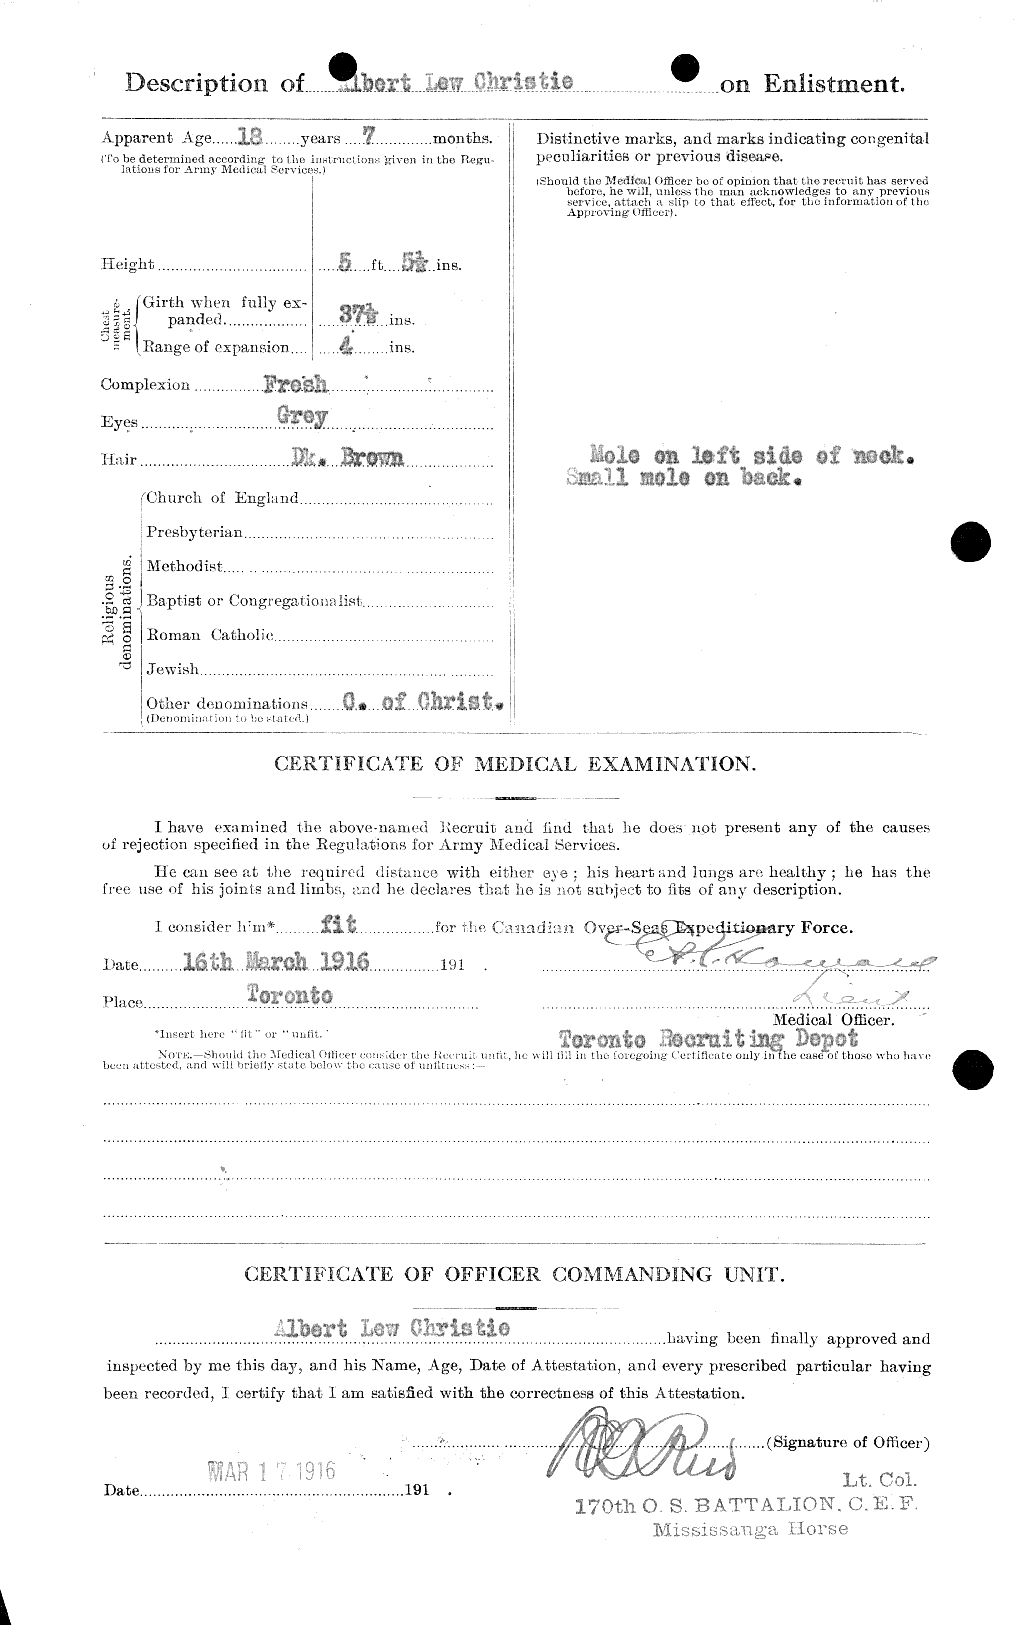 Personnel Records of the First World War - CEF 021855b